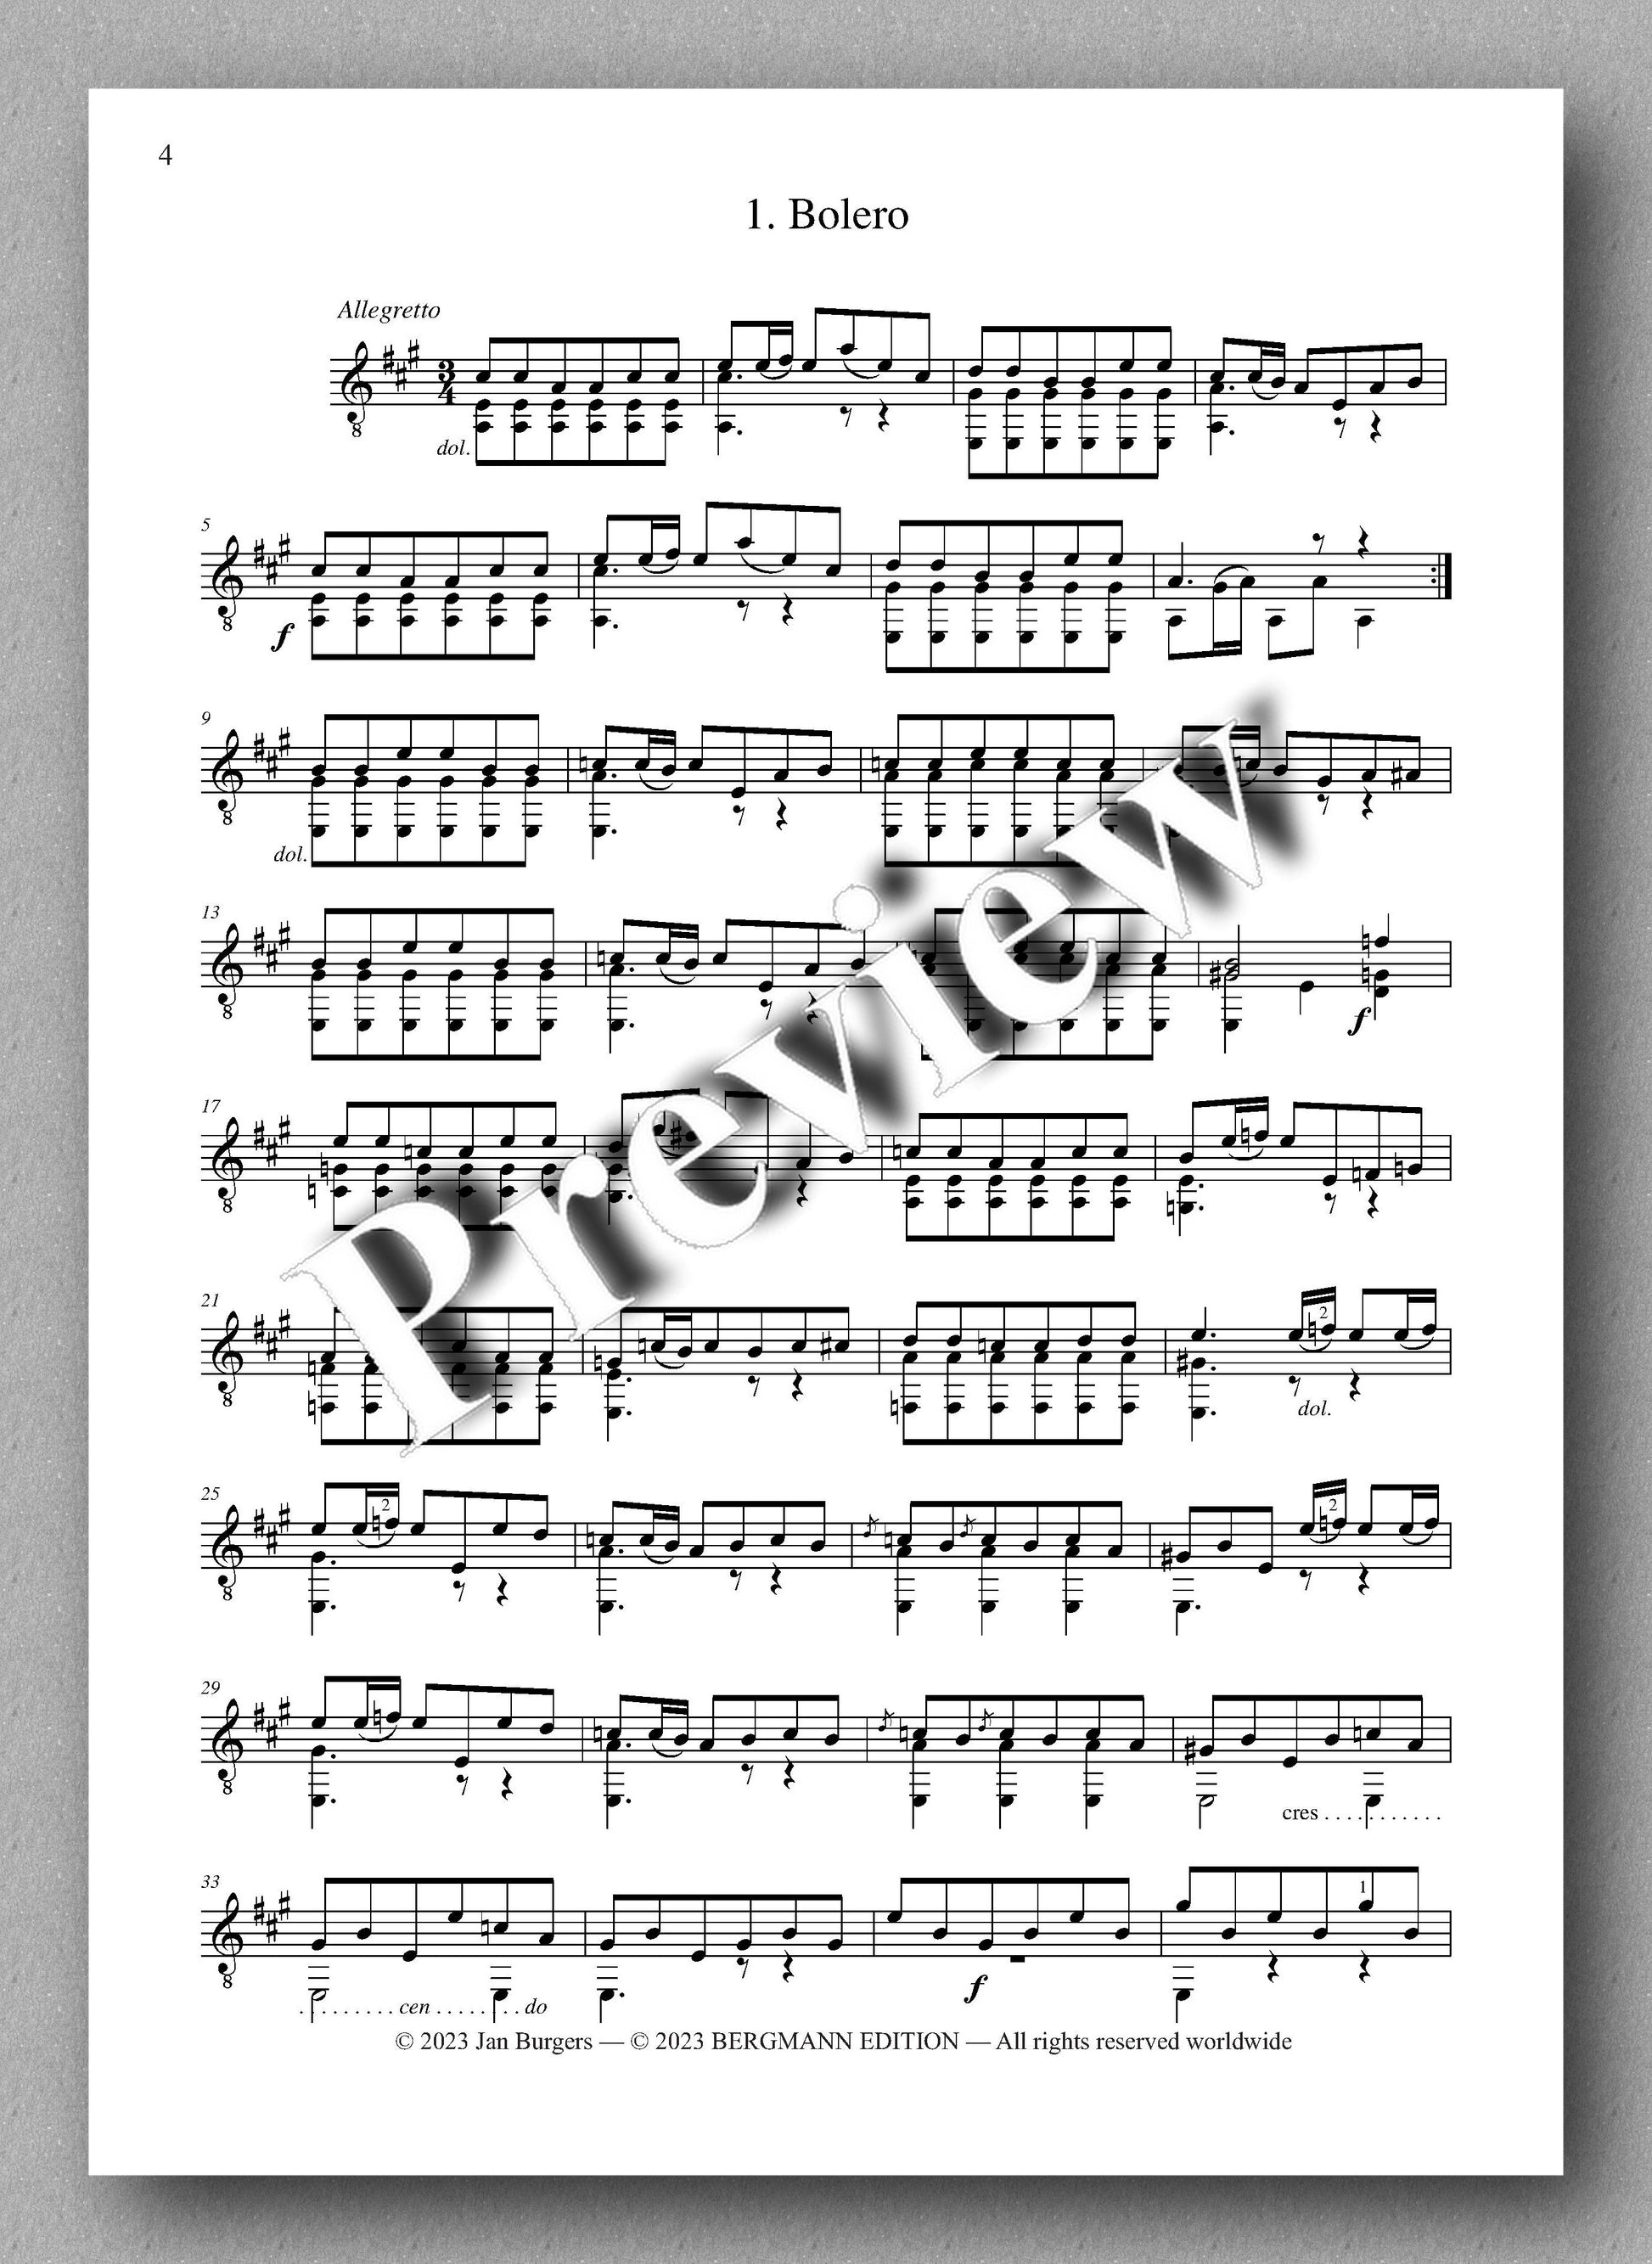 Molino, Collected Works for Guitar Solo, Vol. 41 - preview of the music score 1